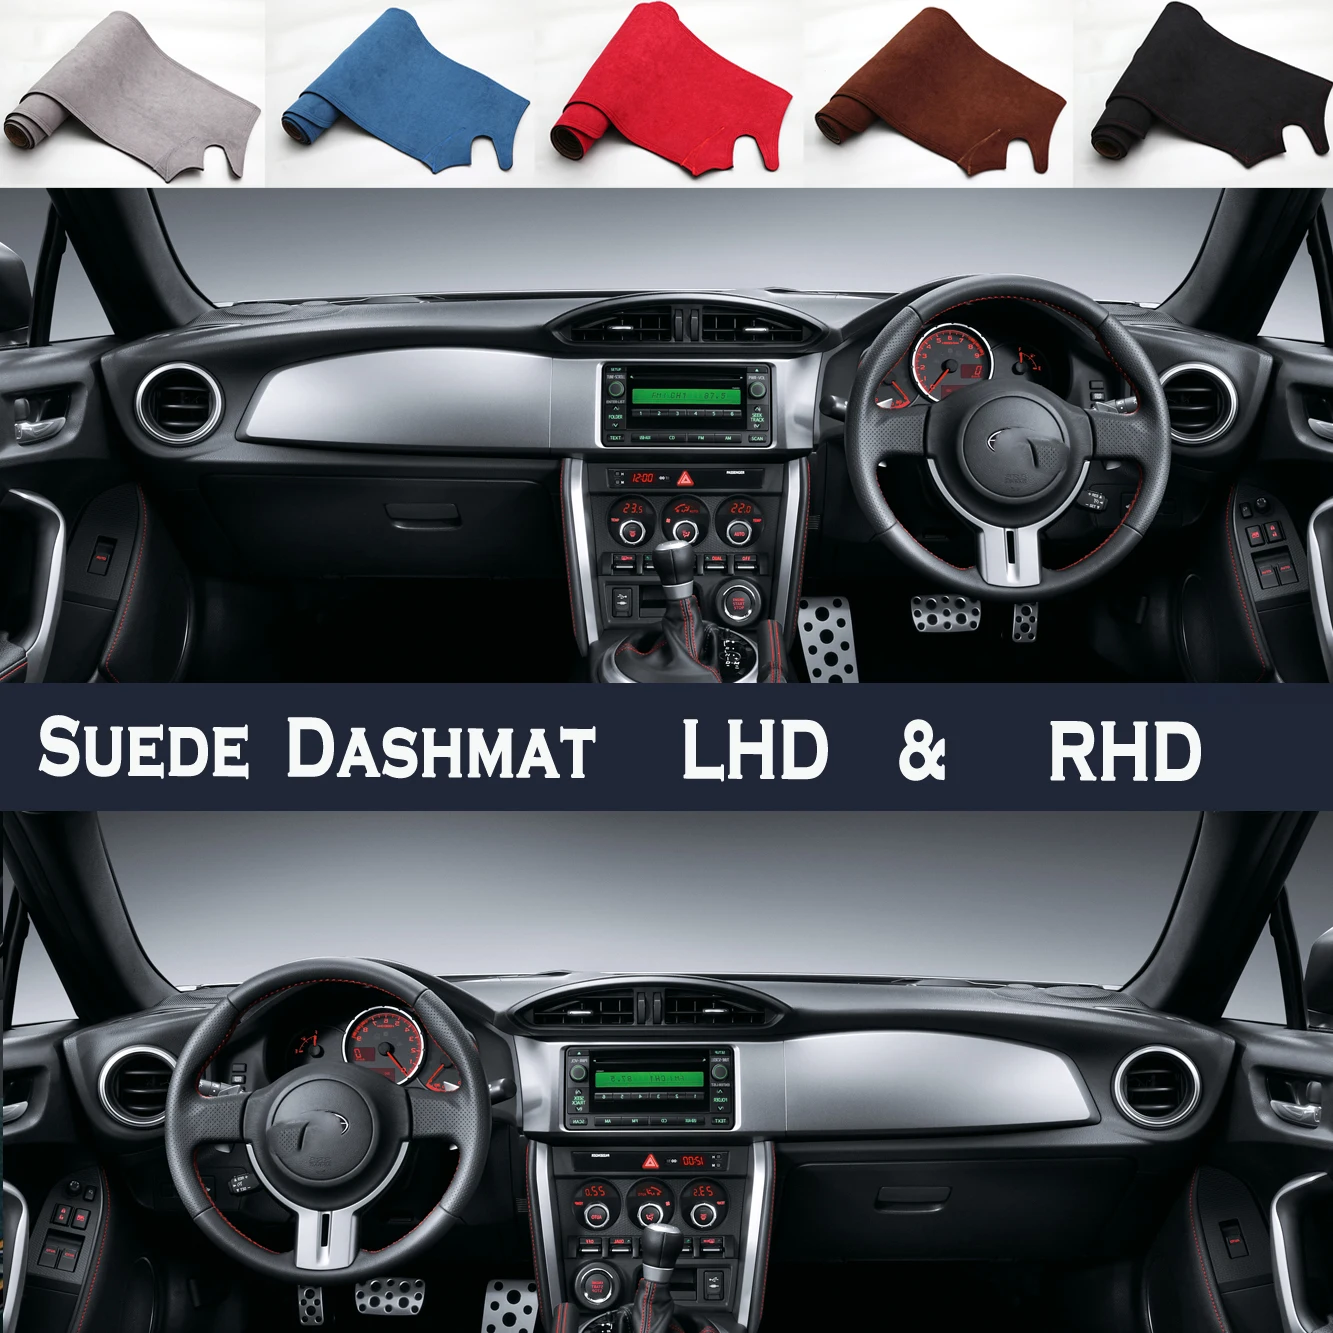 

Car Styling Suede Dash Mat Covers Dashmat Dashboard Pad Accessories for Toyota 86 GT86 FT86 Scion FR-S Subaru BRZ 2012~2019 2016